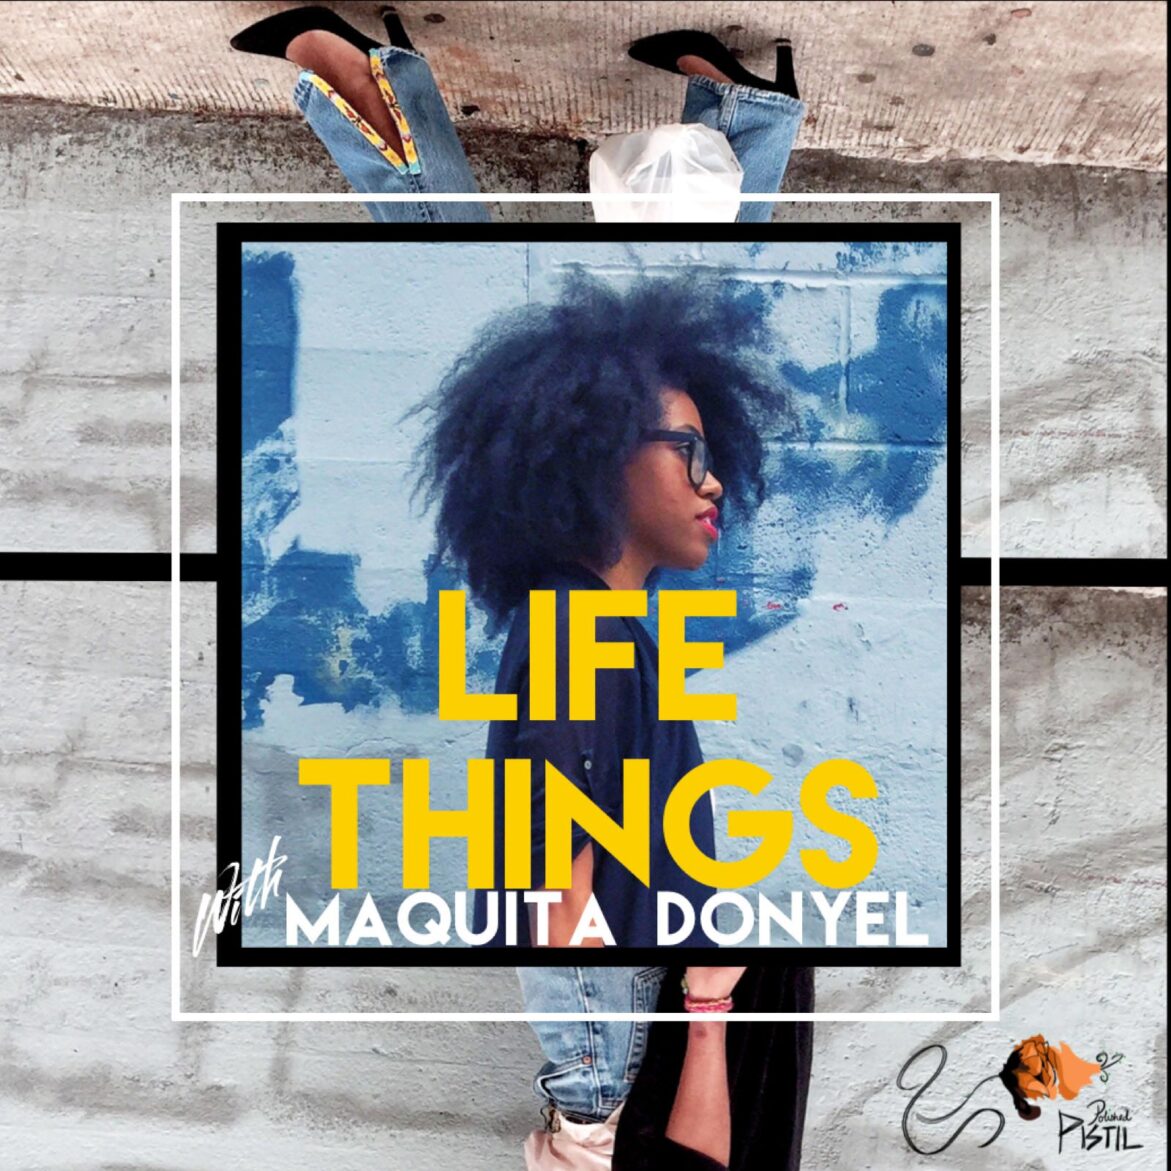 Black Podcasting - Afraid and on the Right Path, Defeating Fear and Limitations – Life Things with Maquita Donyel